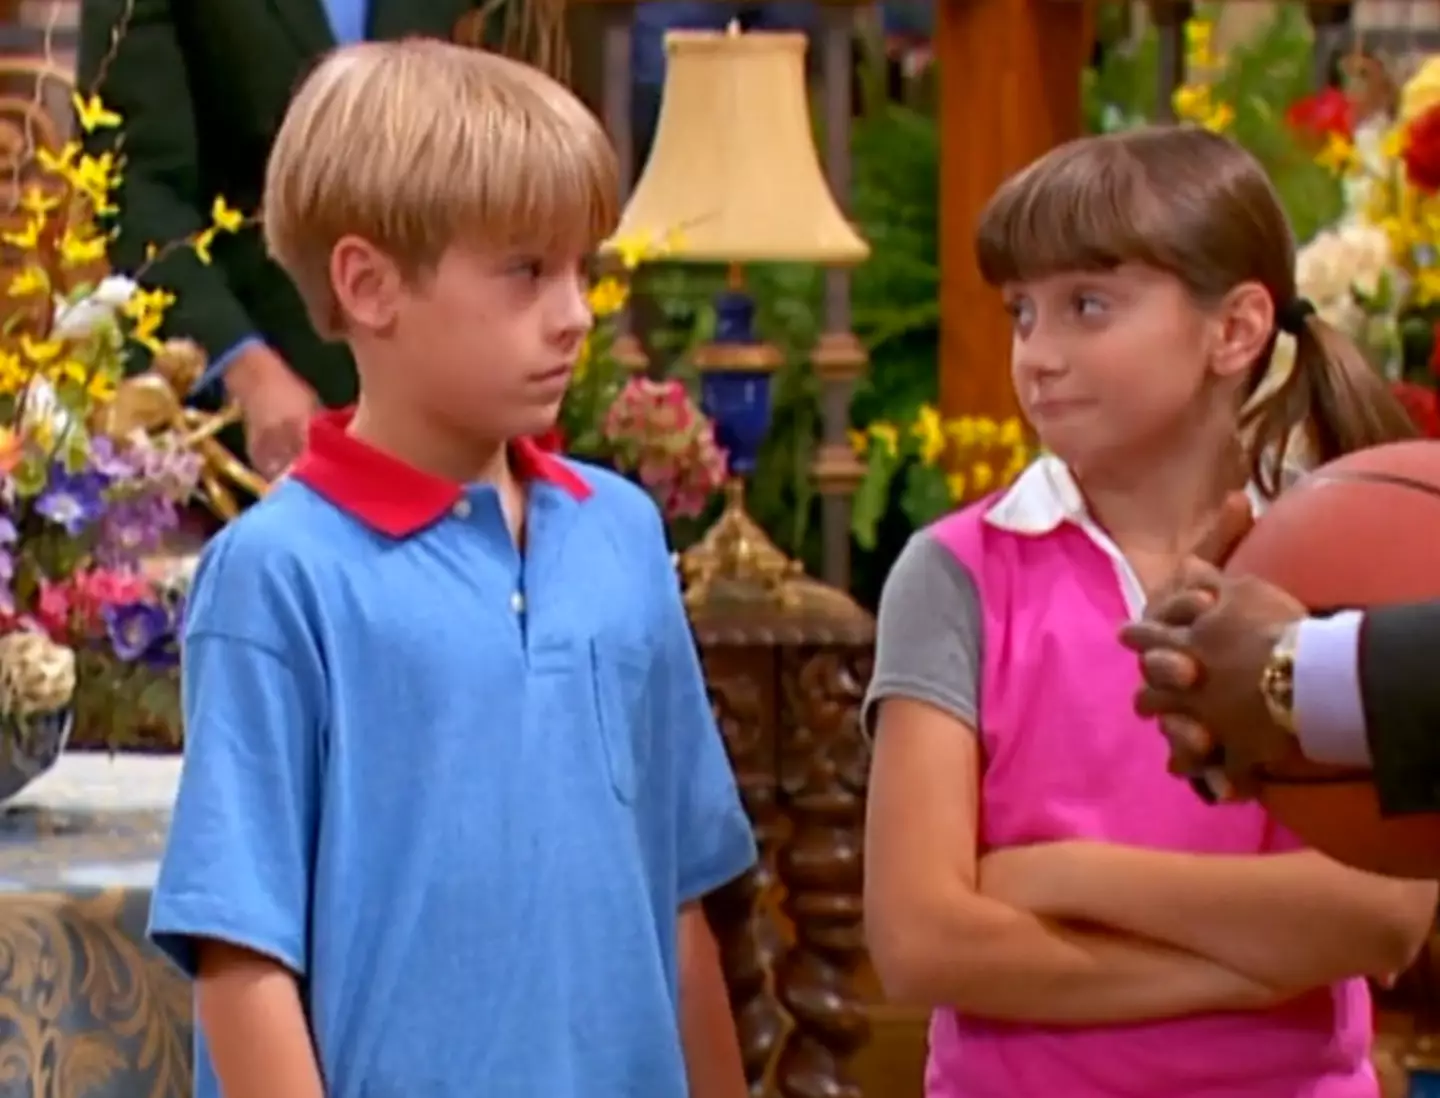 Alyson Stoner starred as Max in The Suite Life of Zack and Cody.